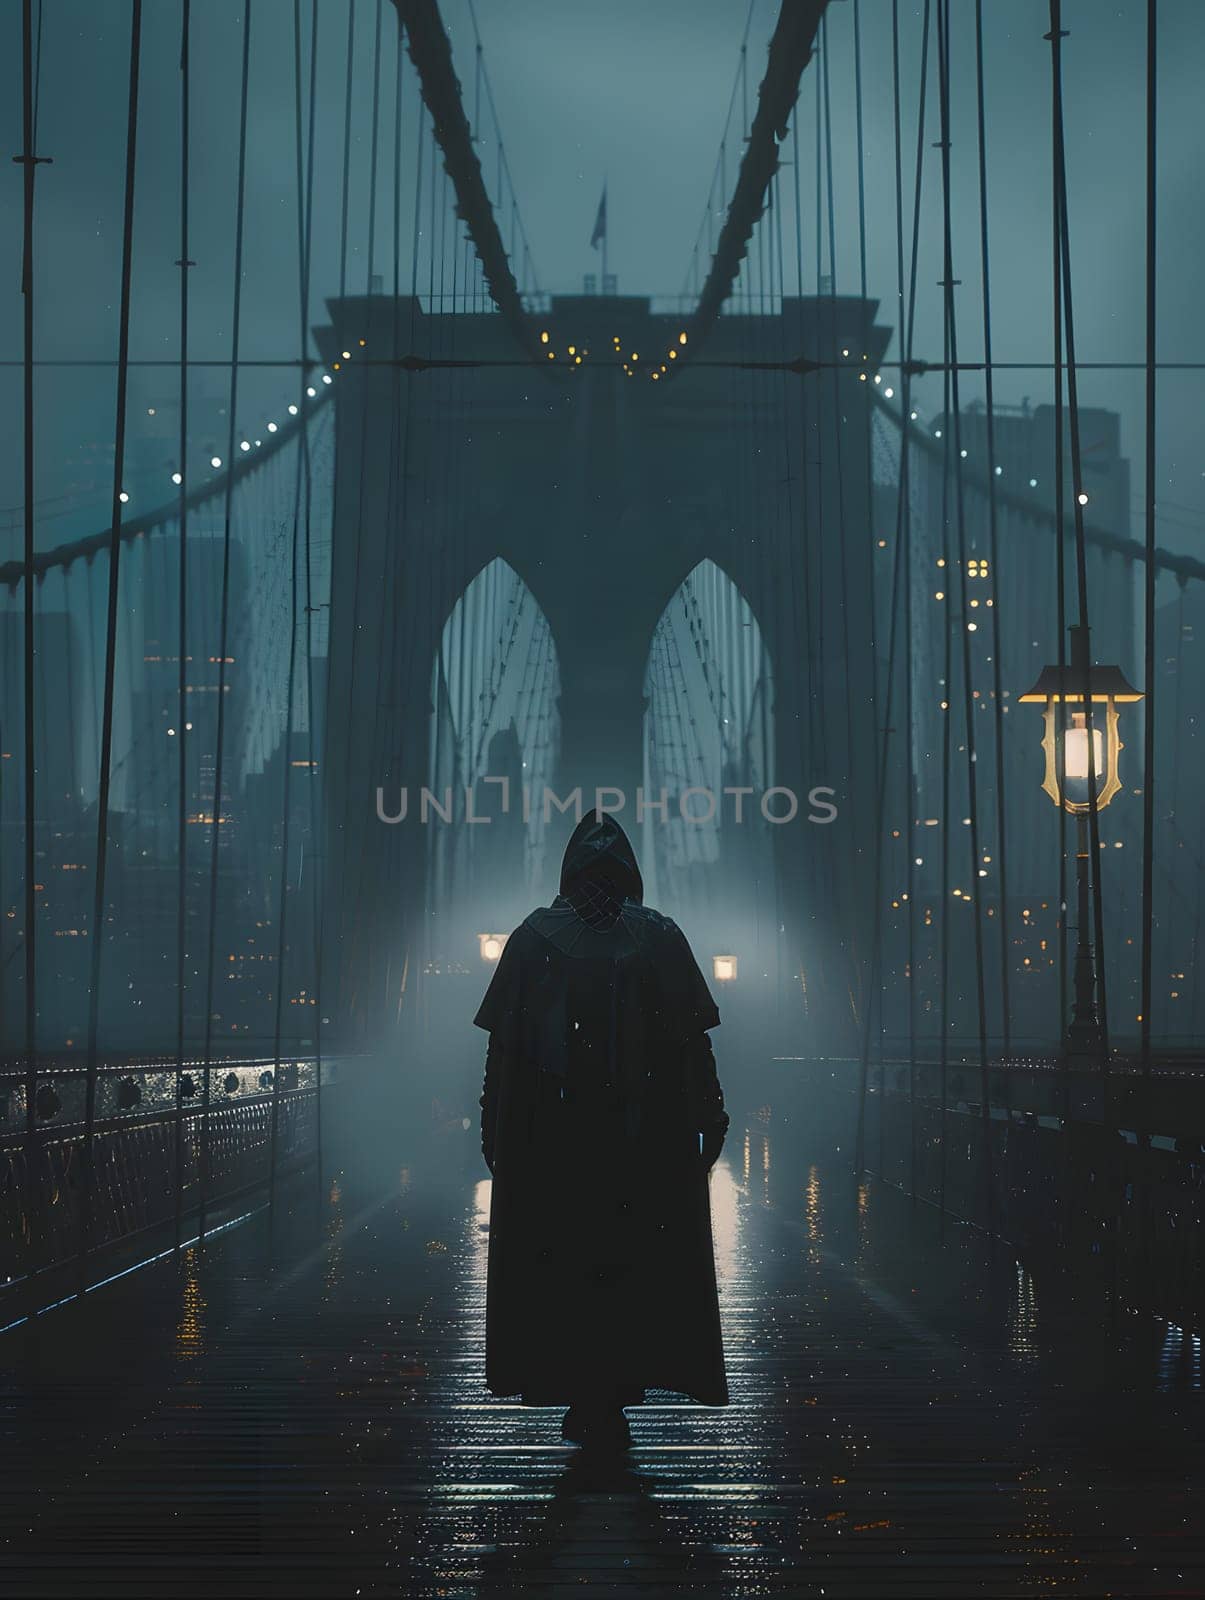 In the darkness, a figure in a hooded coat walks across the bridge in the rain by Nadtochiy